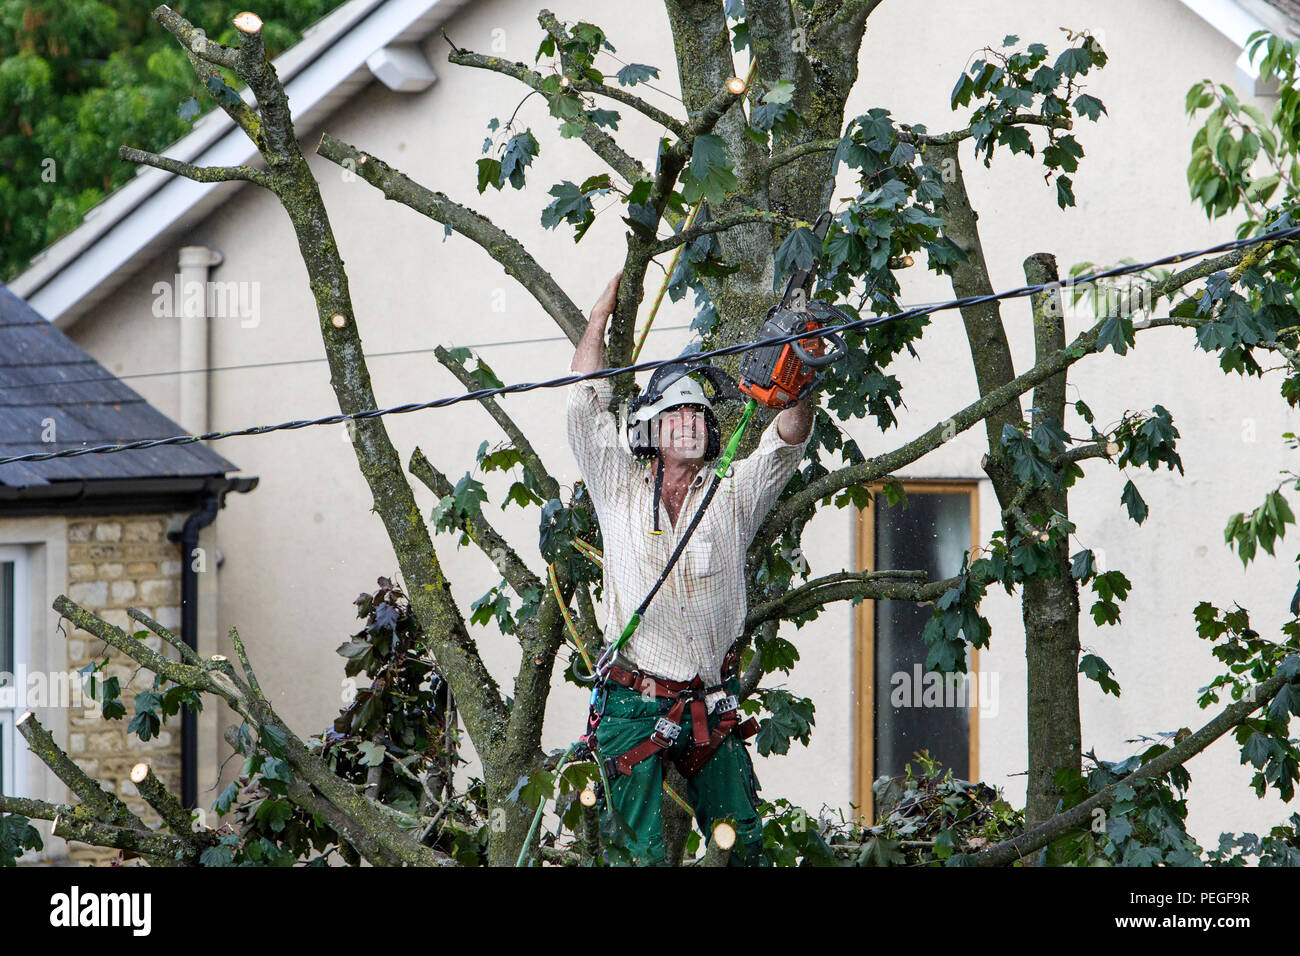 A tree surgeon arborist arboriculturist is pictured as he cuts down a tree in Chippenham, Wilts. Stock Photo